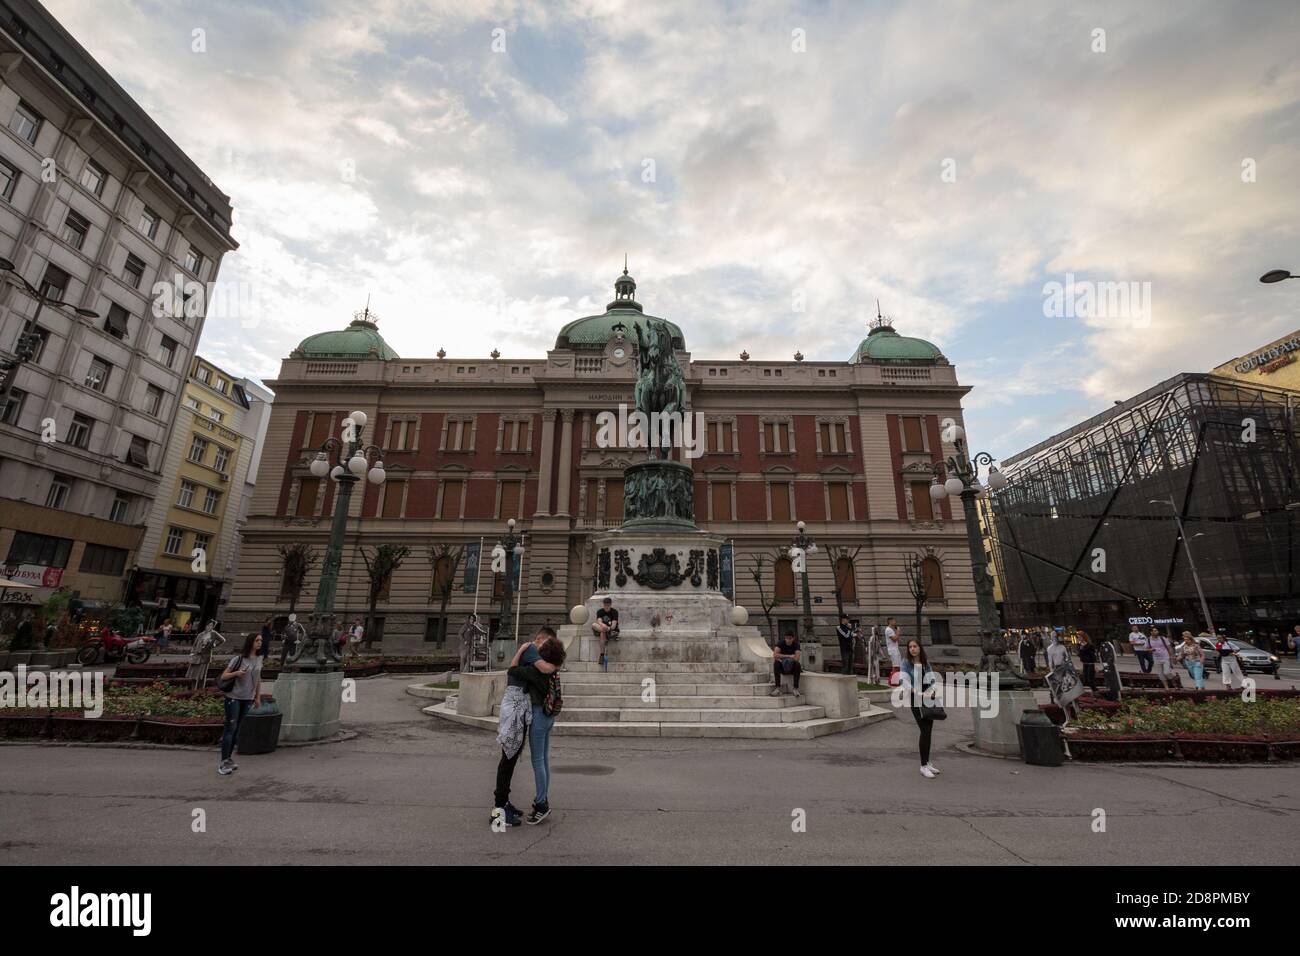 BELGRADE, SERBIA - JULY 19, 2018: Lovers kissing on Trg Republike, or Republic square with Prince Mihailo (Knez Mihailo) statue in front of National M Stock Photo